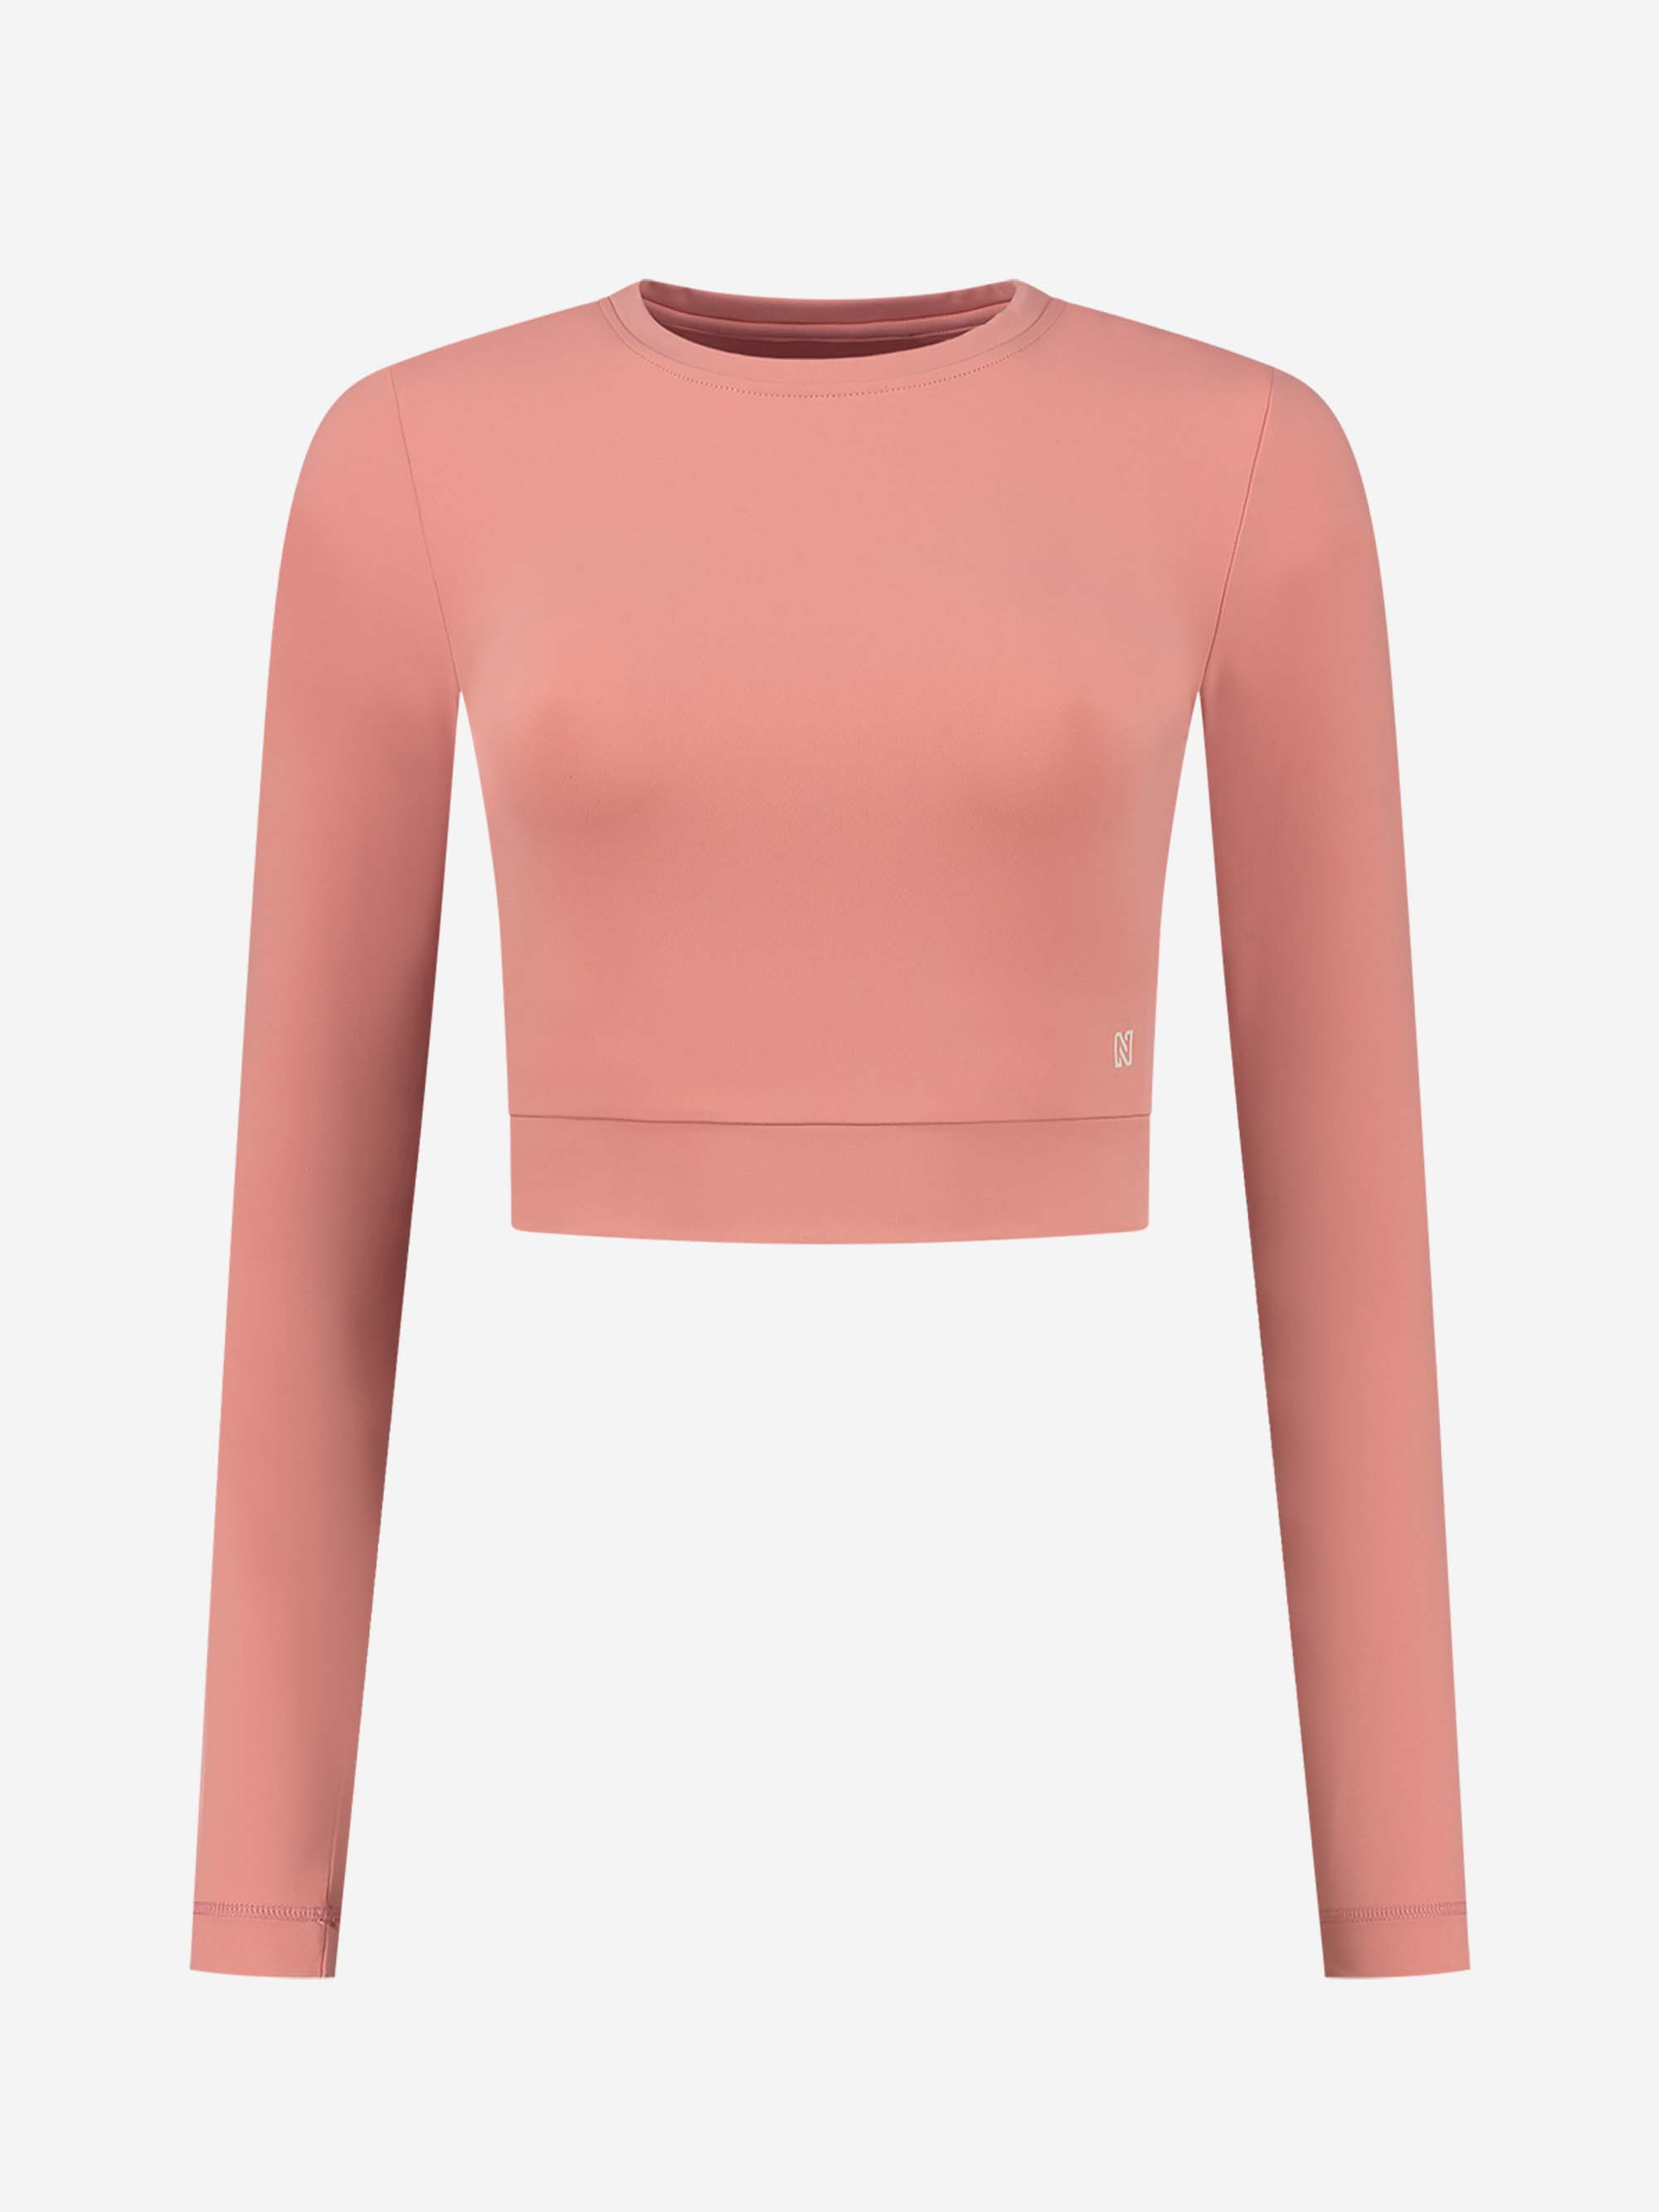 Sport cropped top with long sleeves